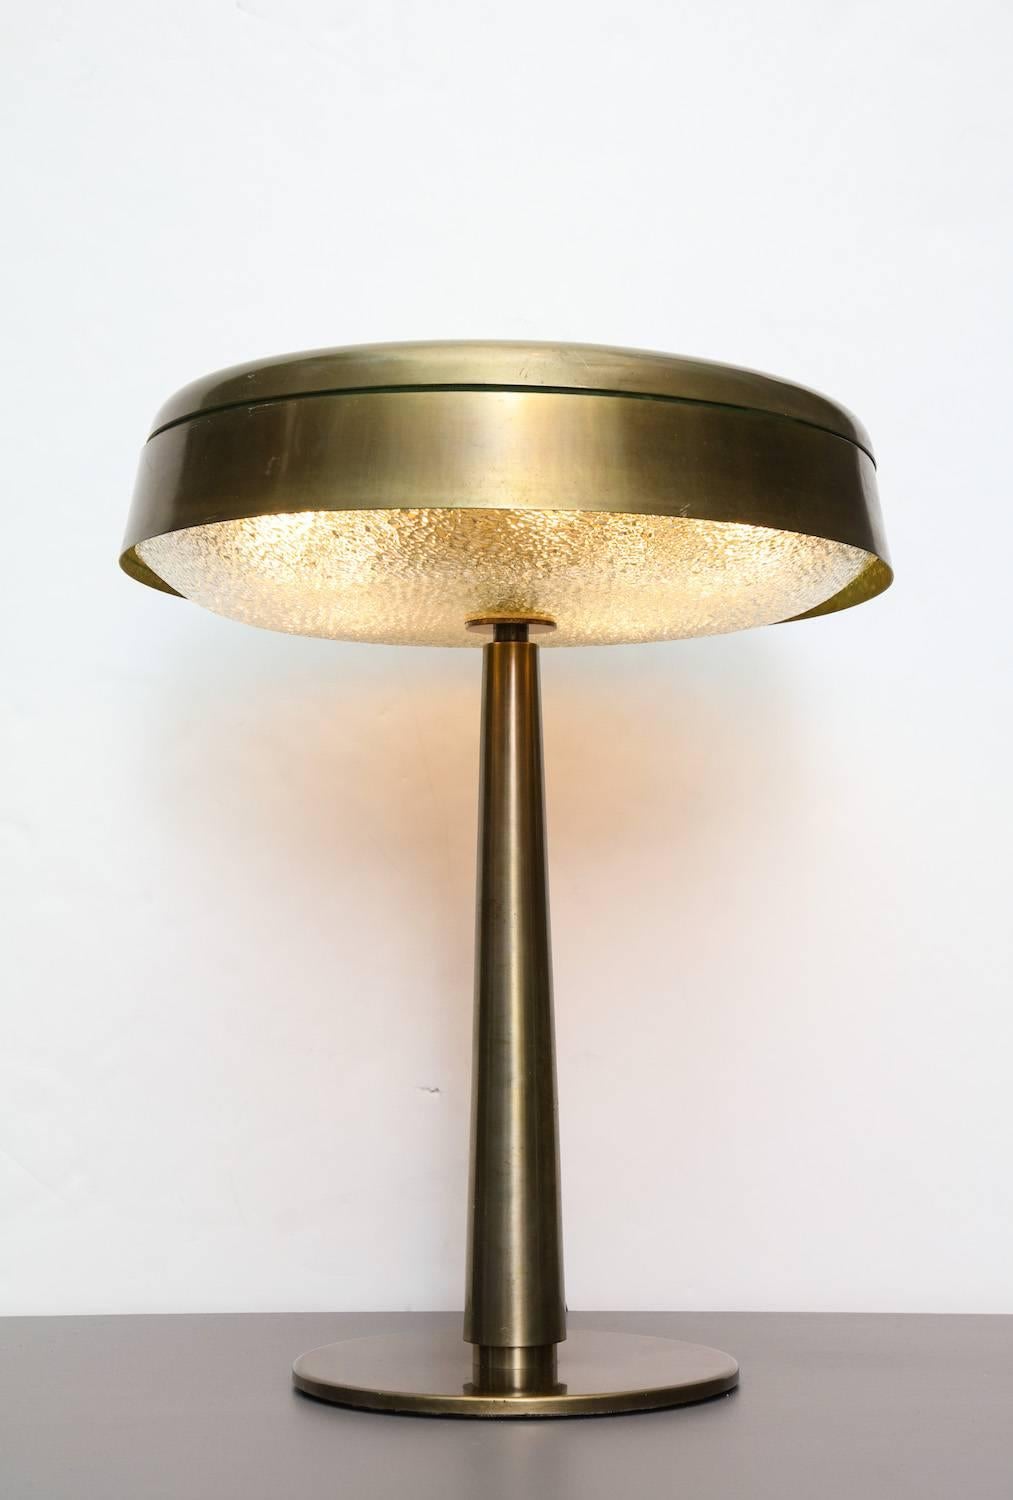 Rare table lamp, model #2278 by Fontana Arte.
Oxidized steel and brass, painted interior shade. Textured and curved glass reflector. Five candelabra sockets. Very good original condition with new sockets, wiring and plug. Original push-switch on